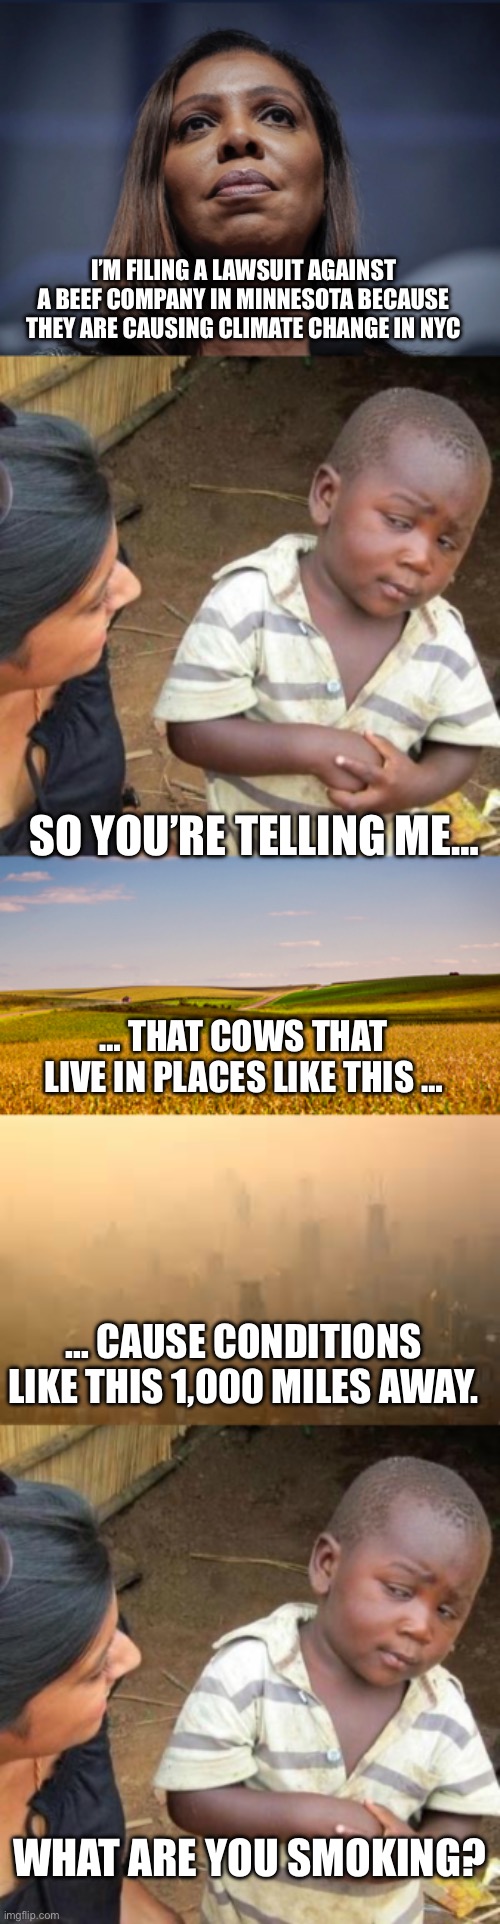 Makes sense to me, what’s your problem? | I’M FILING A LAWSUIT AGAINST A BEEF COMPANY IN MINNESOTA BECAUSE THEY ARE CAUSING CLIMATE CHANGE IN NYC; SO YOU’RE TELLING ME…; … THAT COWS THAT LIVE IN PLACES LIKE THIS …; … CAUSE CONDITIONS LIKE THIS 1,000 MILES AWAY. WHAT ARE YOU SMOKING? | image tagged in letitia james looks up,so you're telling me,farmland,smog | made w/ Imgflip meme maker